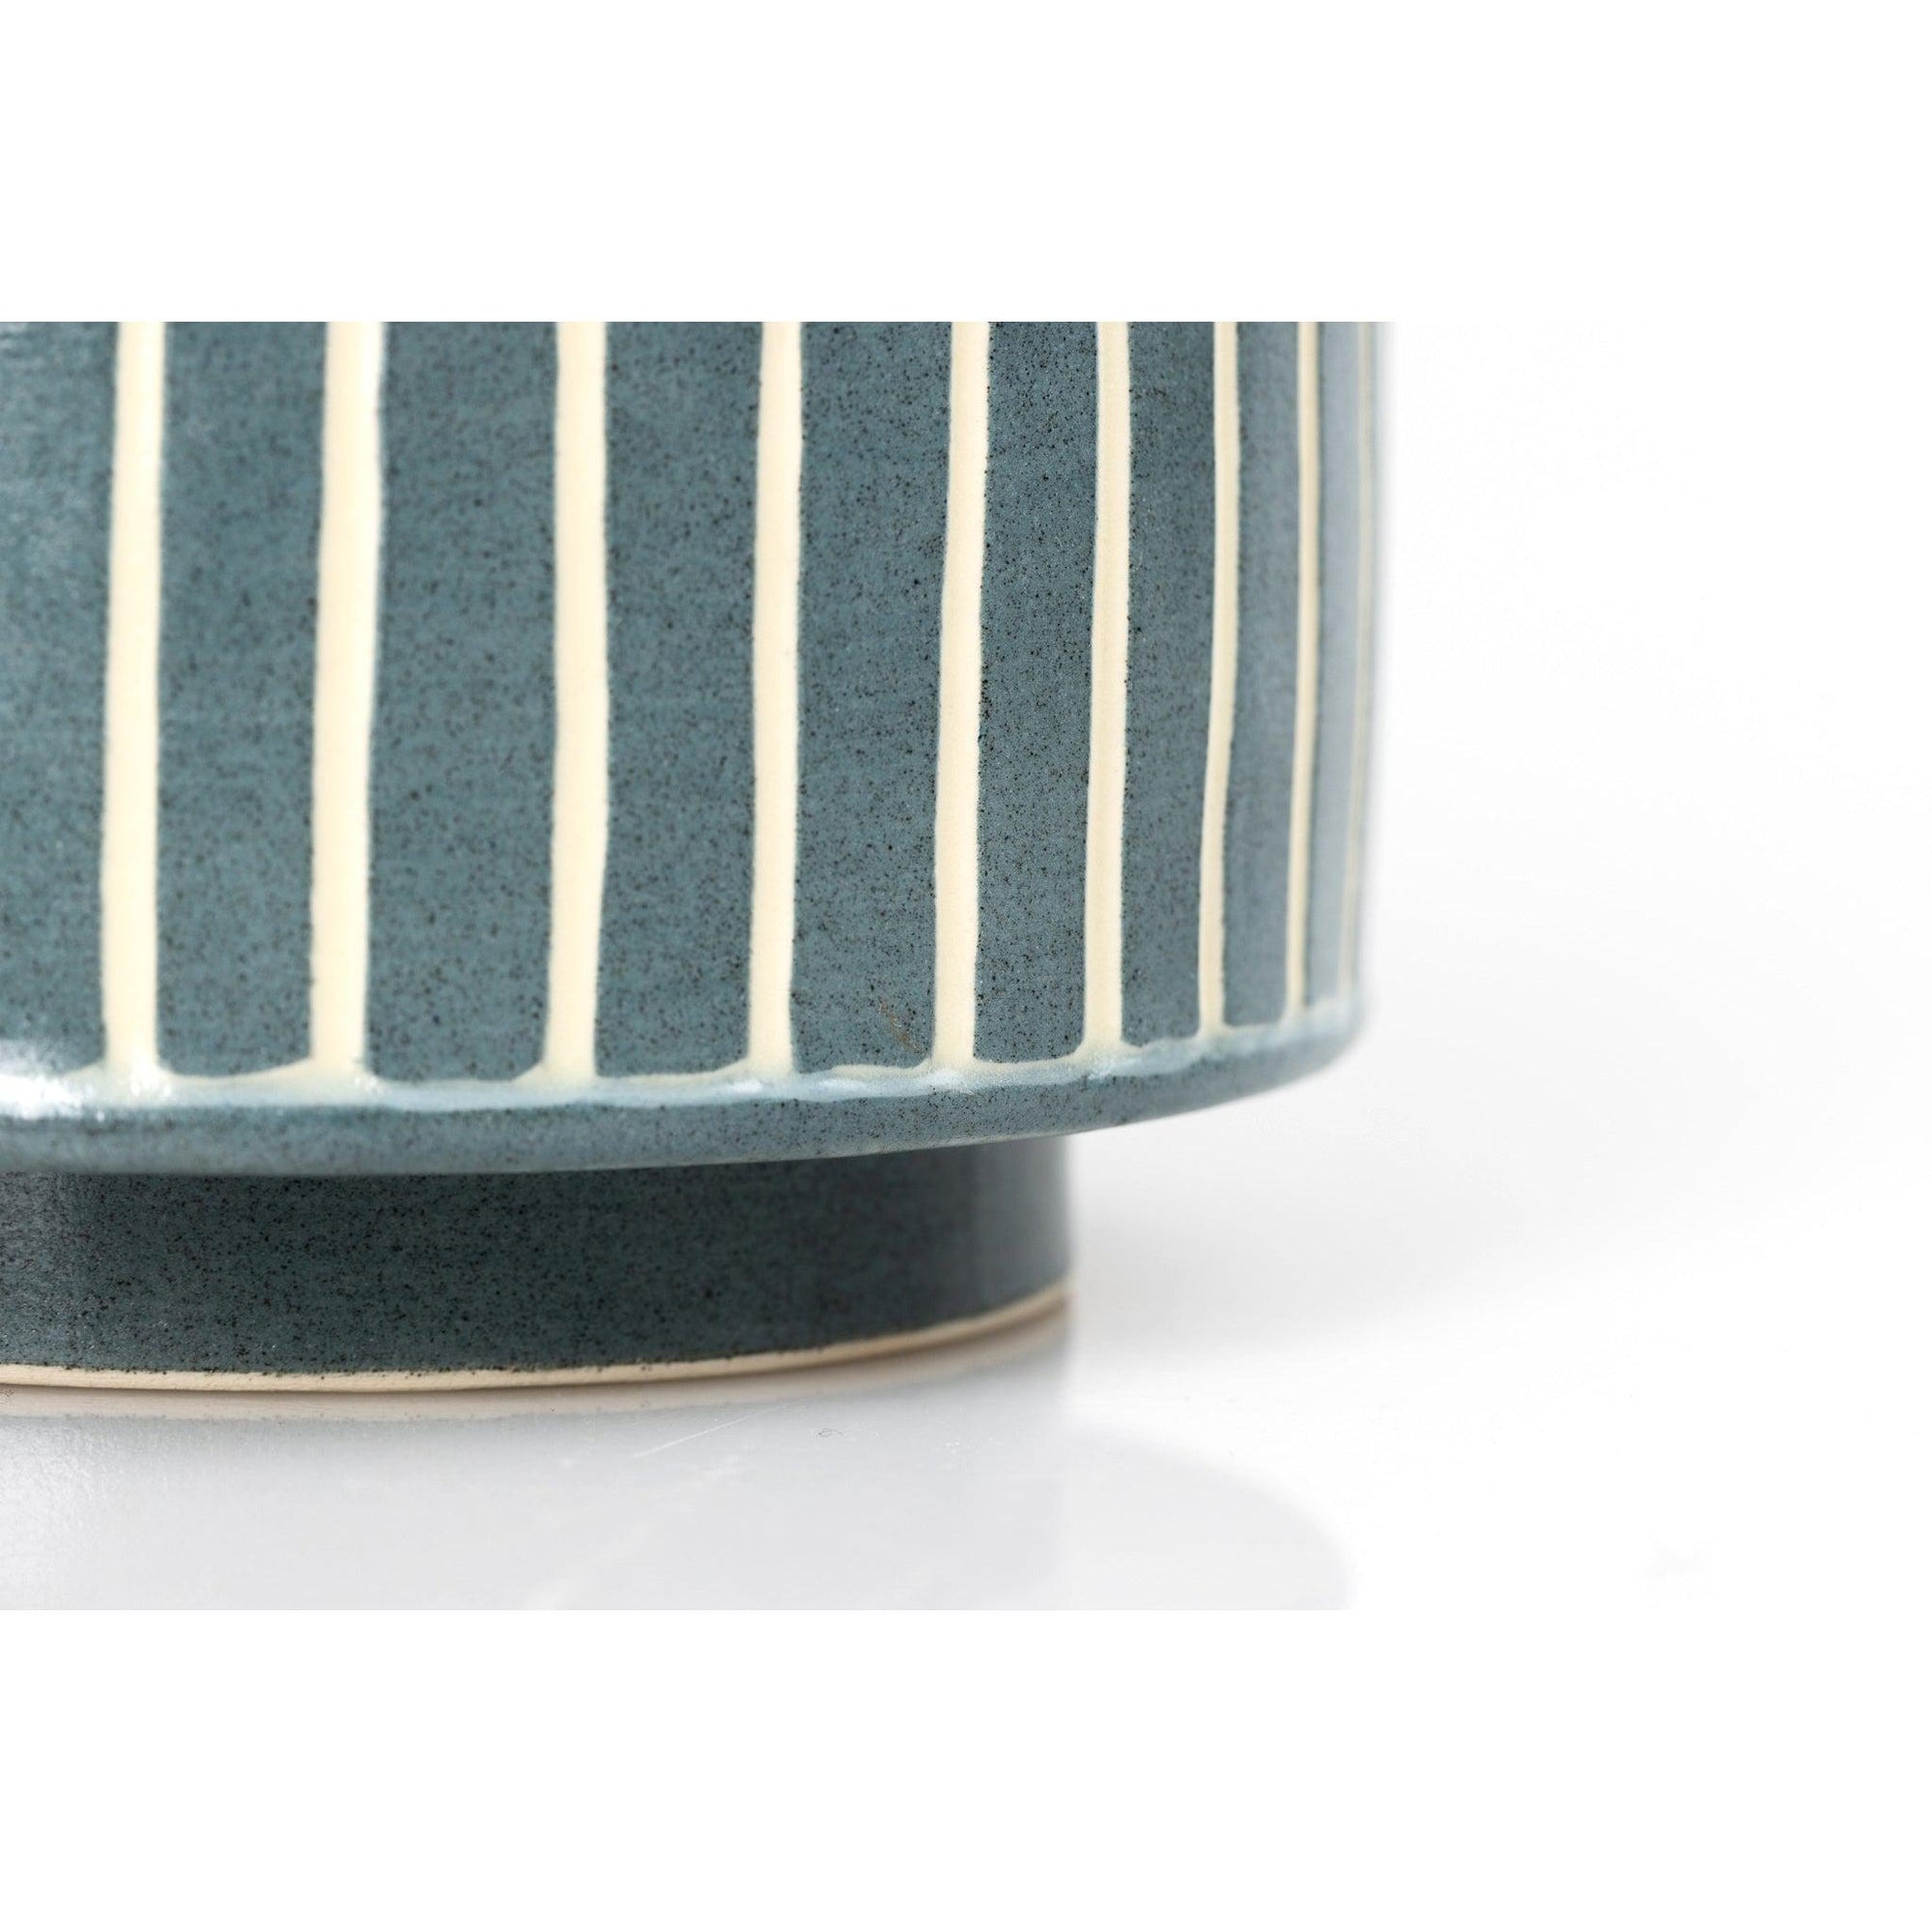 Sh.V2 Short Bowl, handbuilt ceramic created by Emily-Kriste Wilcox, available from Padstow Gallery, Cornwall